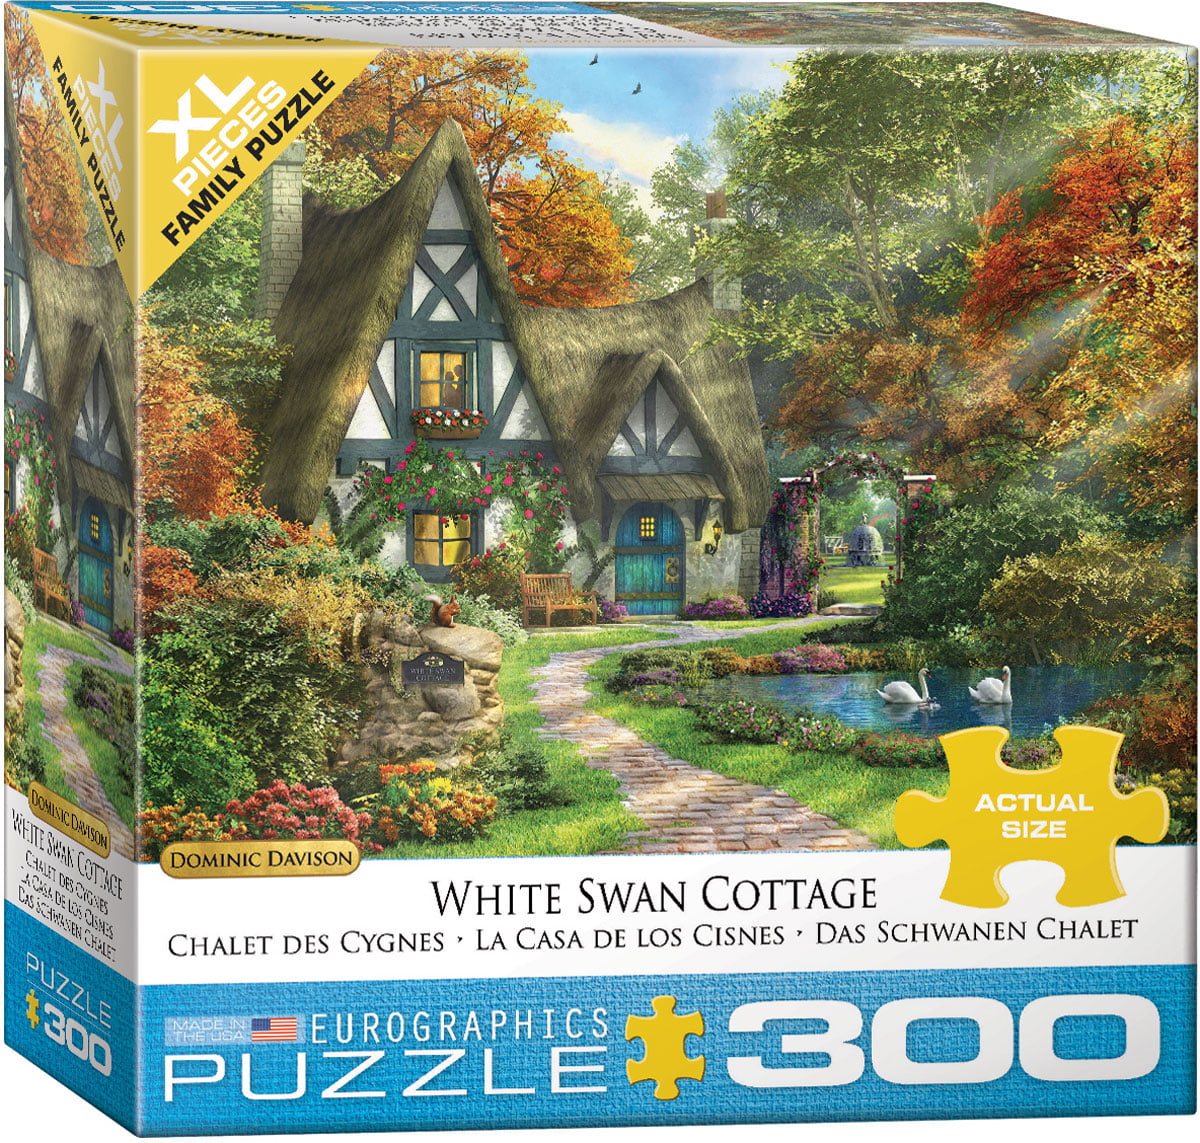 Sure-Lox 1000 PC Jigsaw Puzzle by Dominic Davison Country Manors 2011 for sale online 